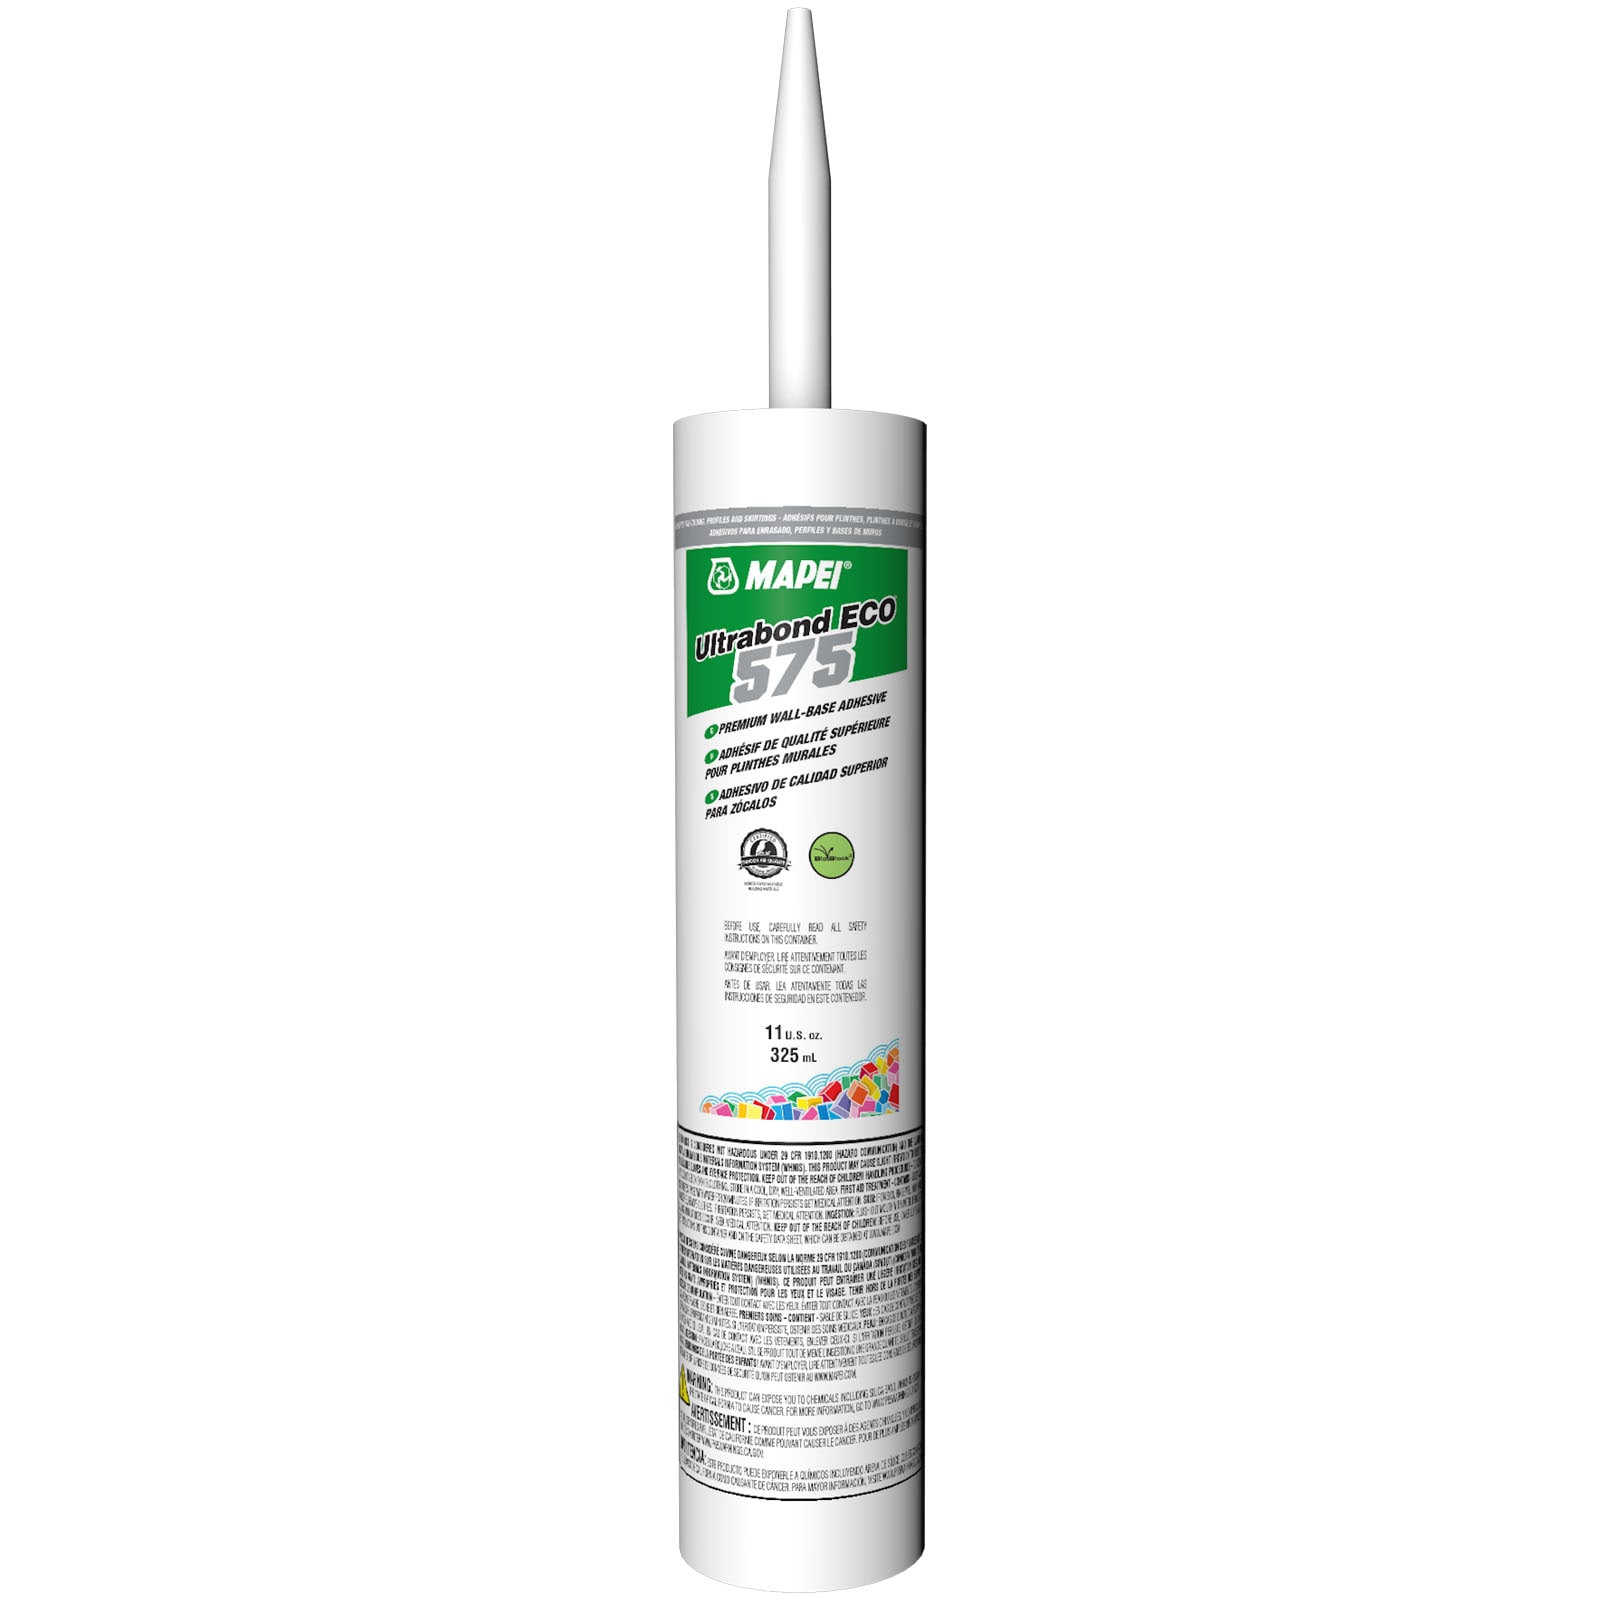 Henry 4GL H663 OD CPT Adhesive 12187